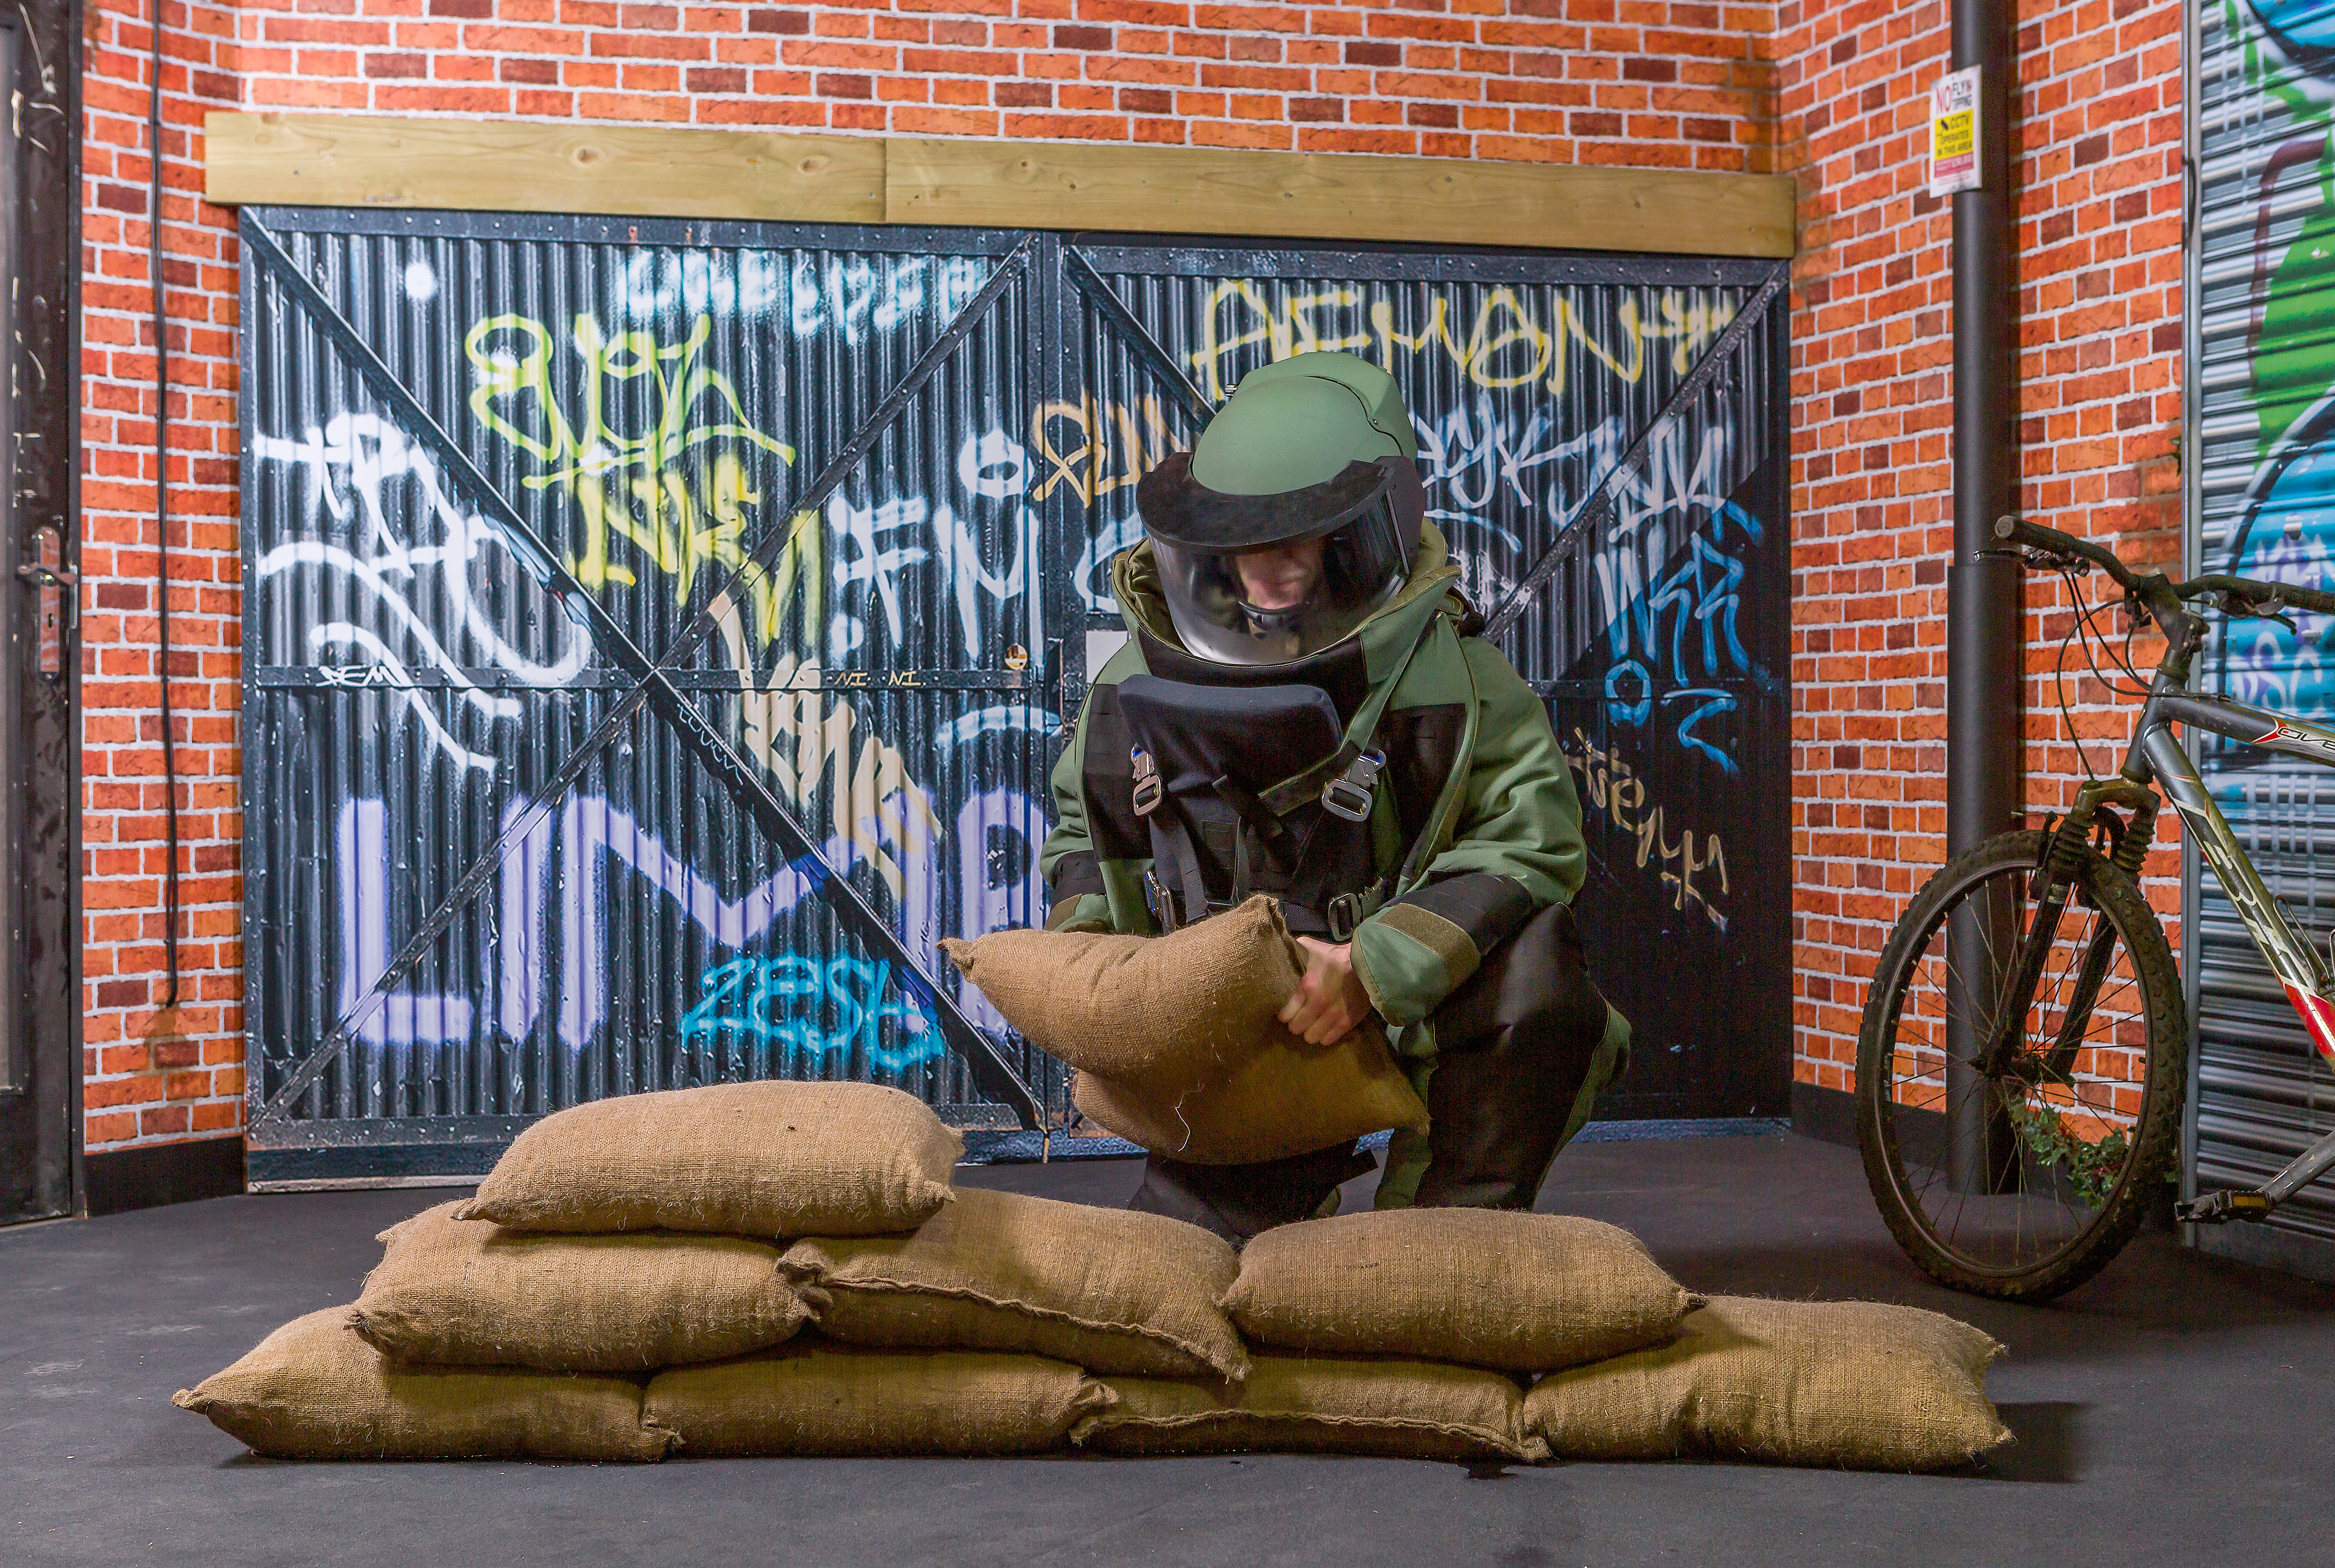 BlastSax April 2019 with soldier in protective equipment building a wall of Blastsax 2.jpg